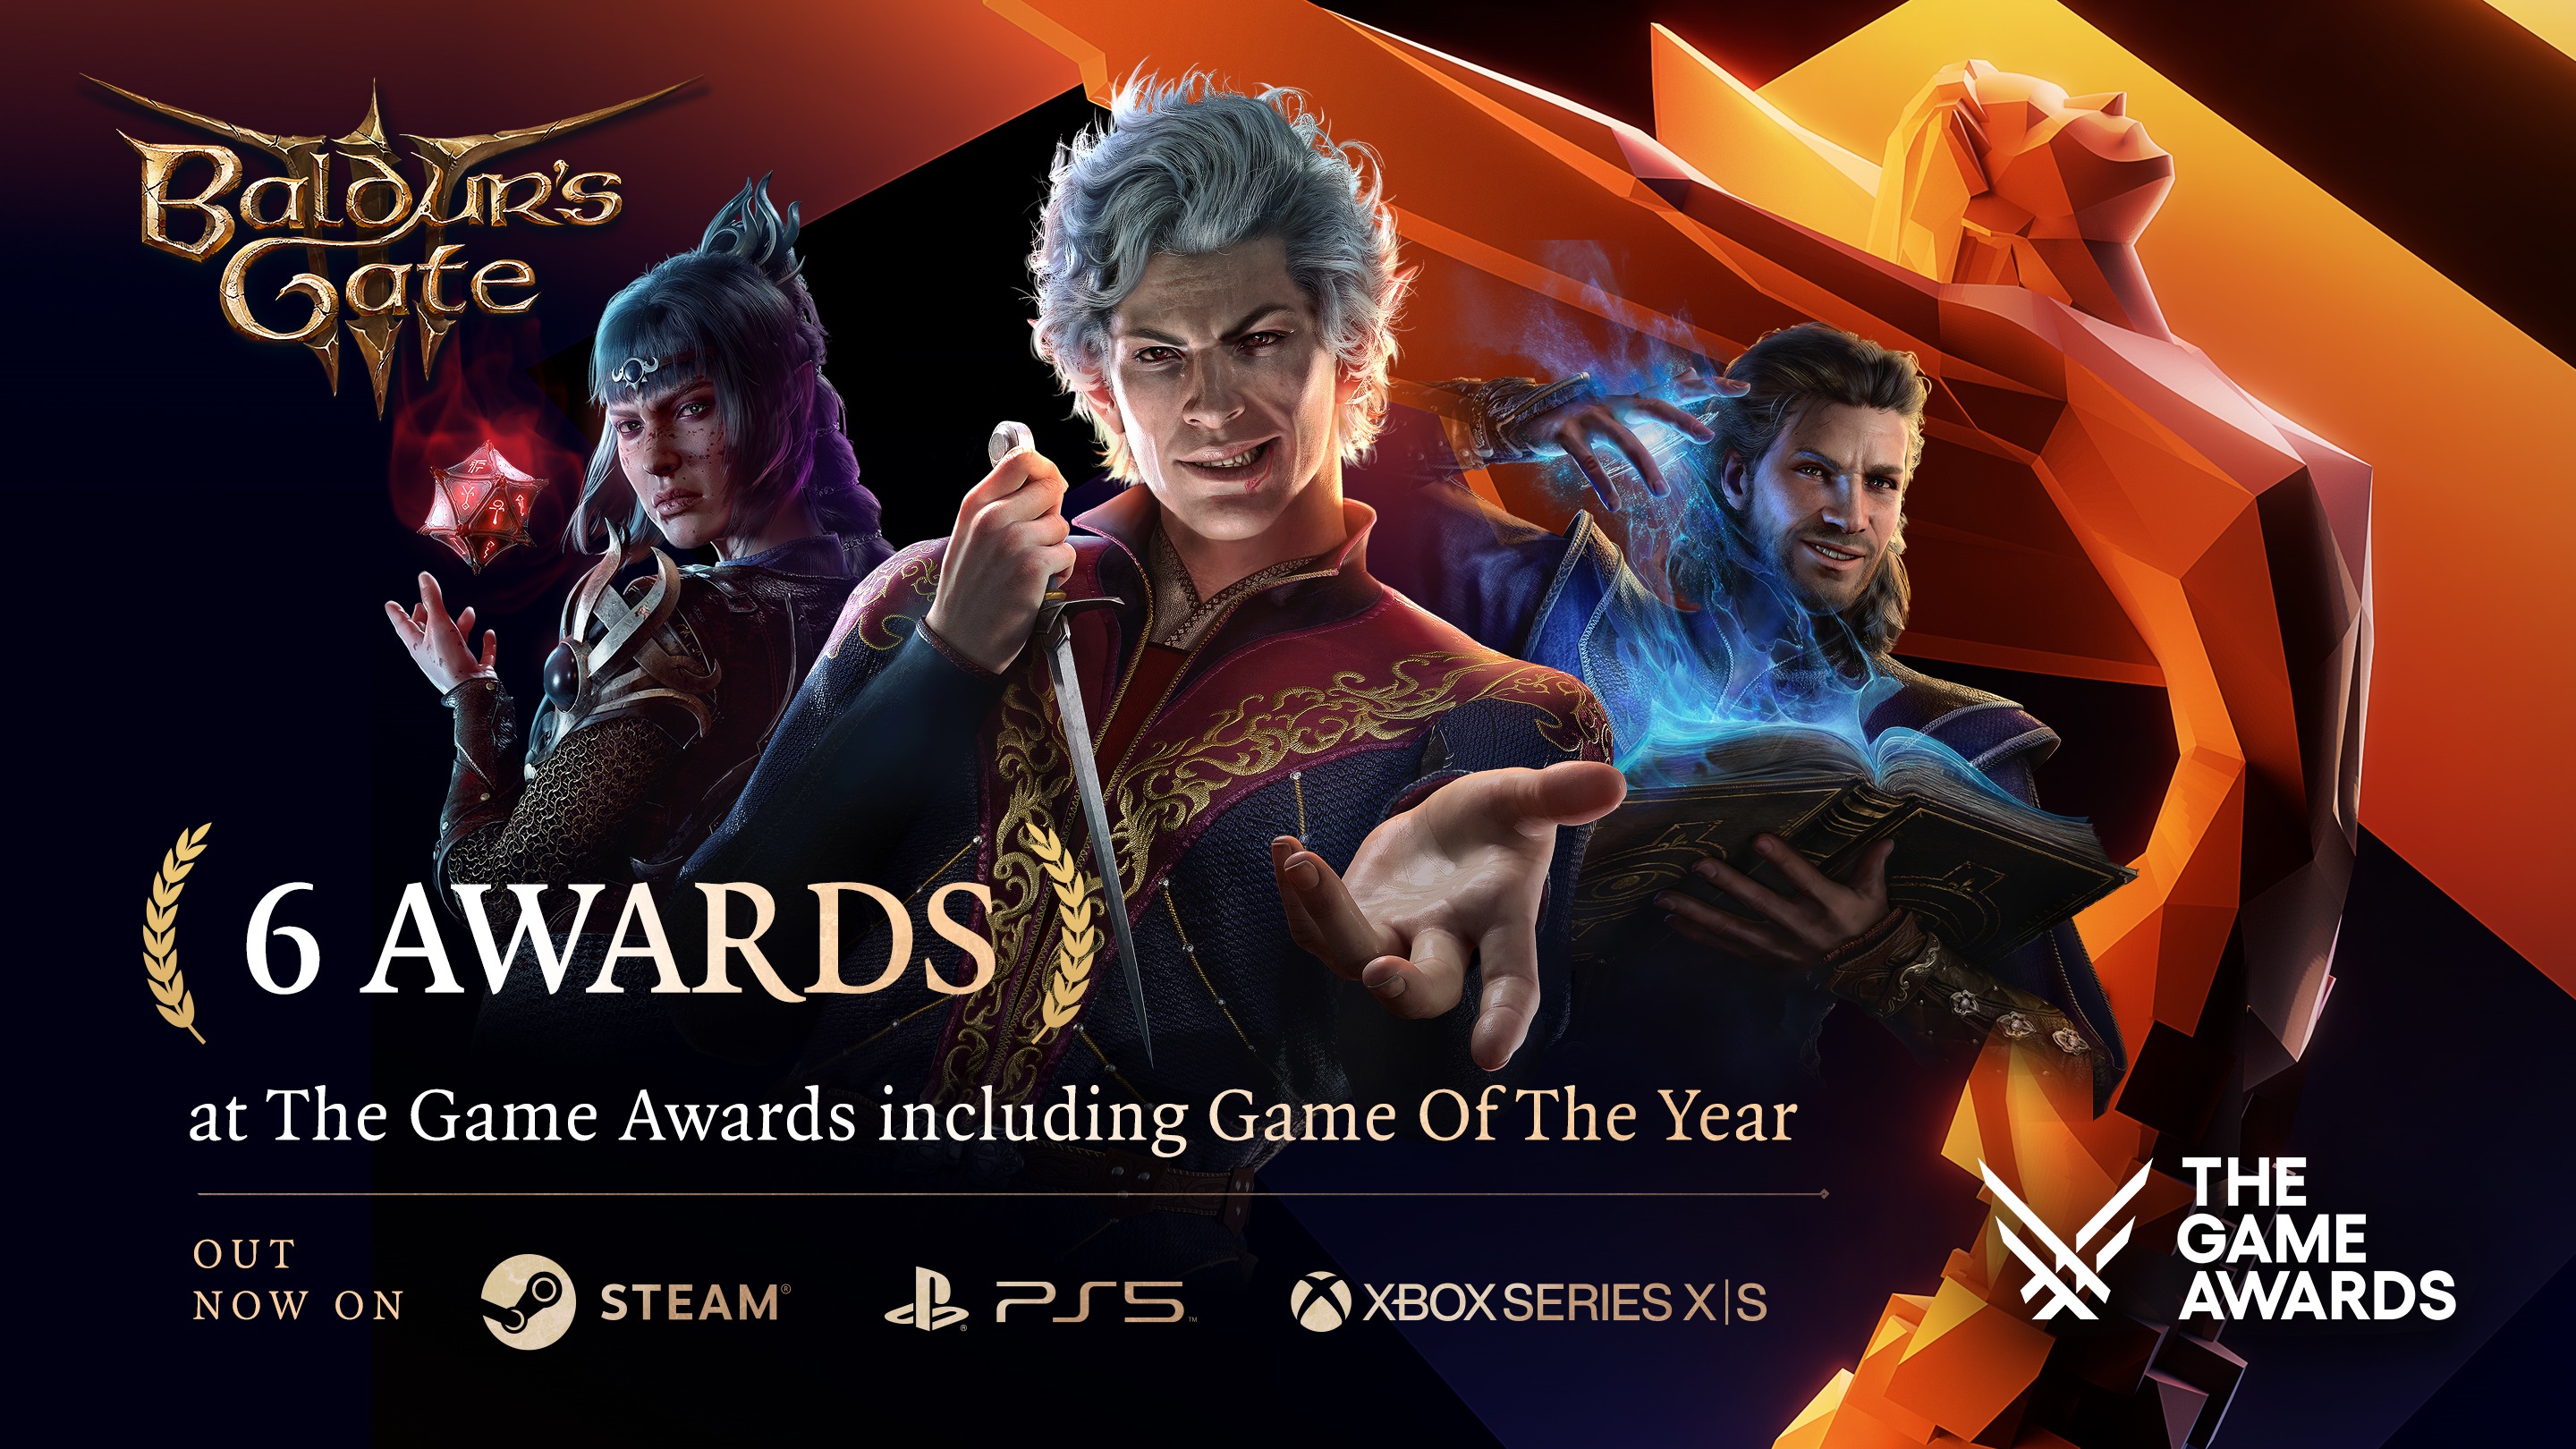 The Game Awards: The Best Mobile and Ongoing Game Genshin Impact